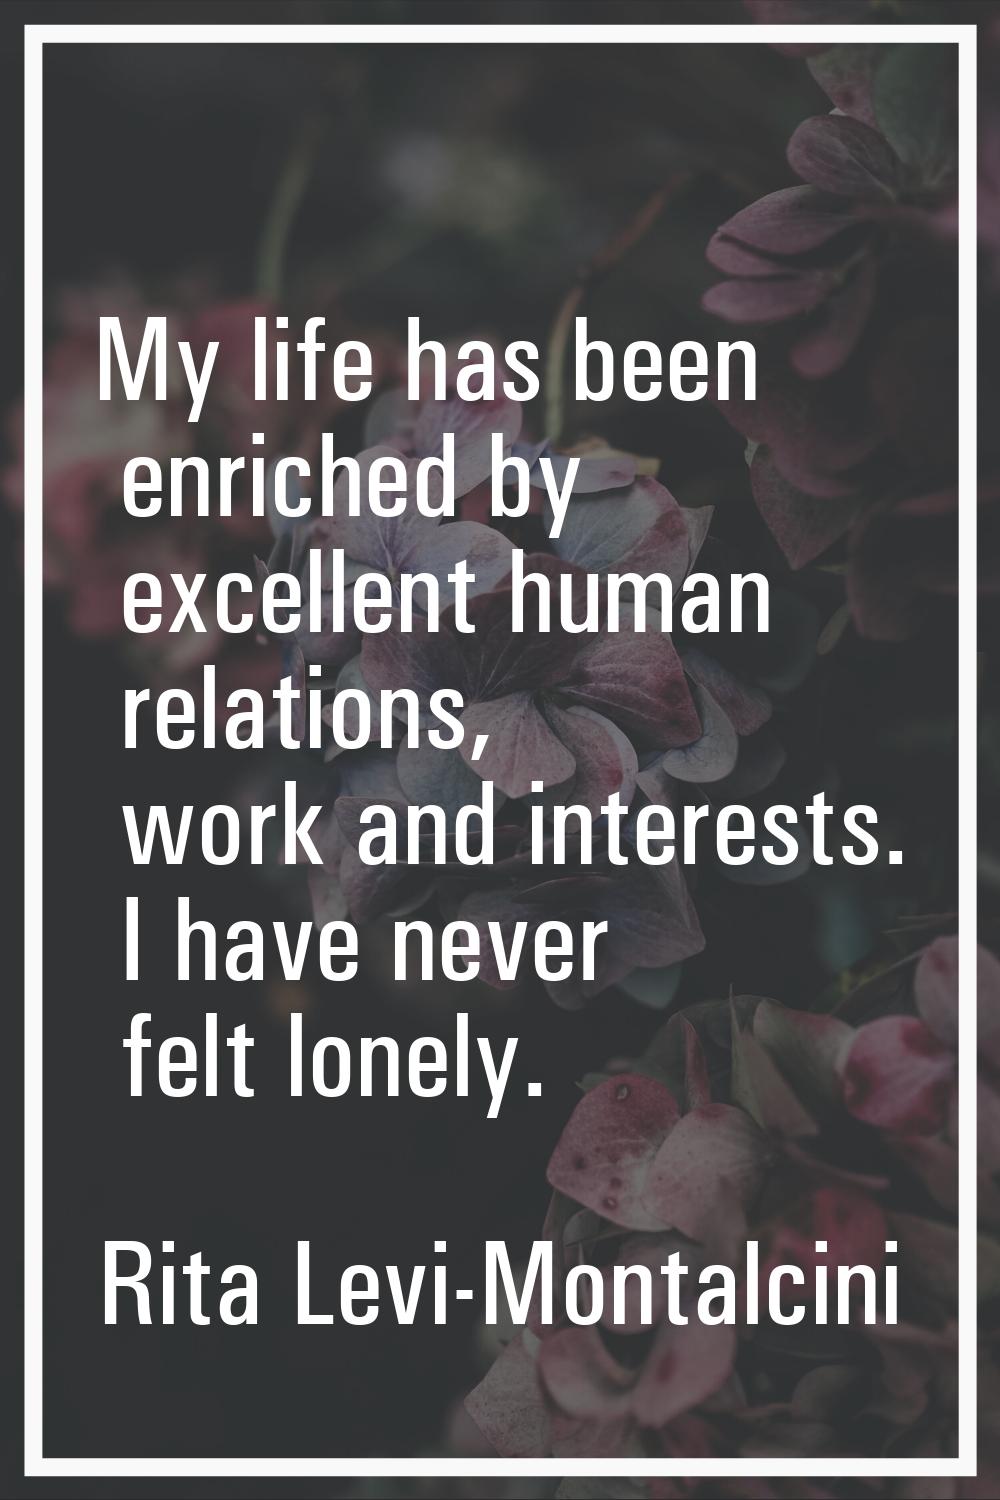 My life has been enriched by excellent human relations, work and interests. I have never felt lonel